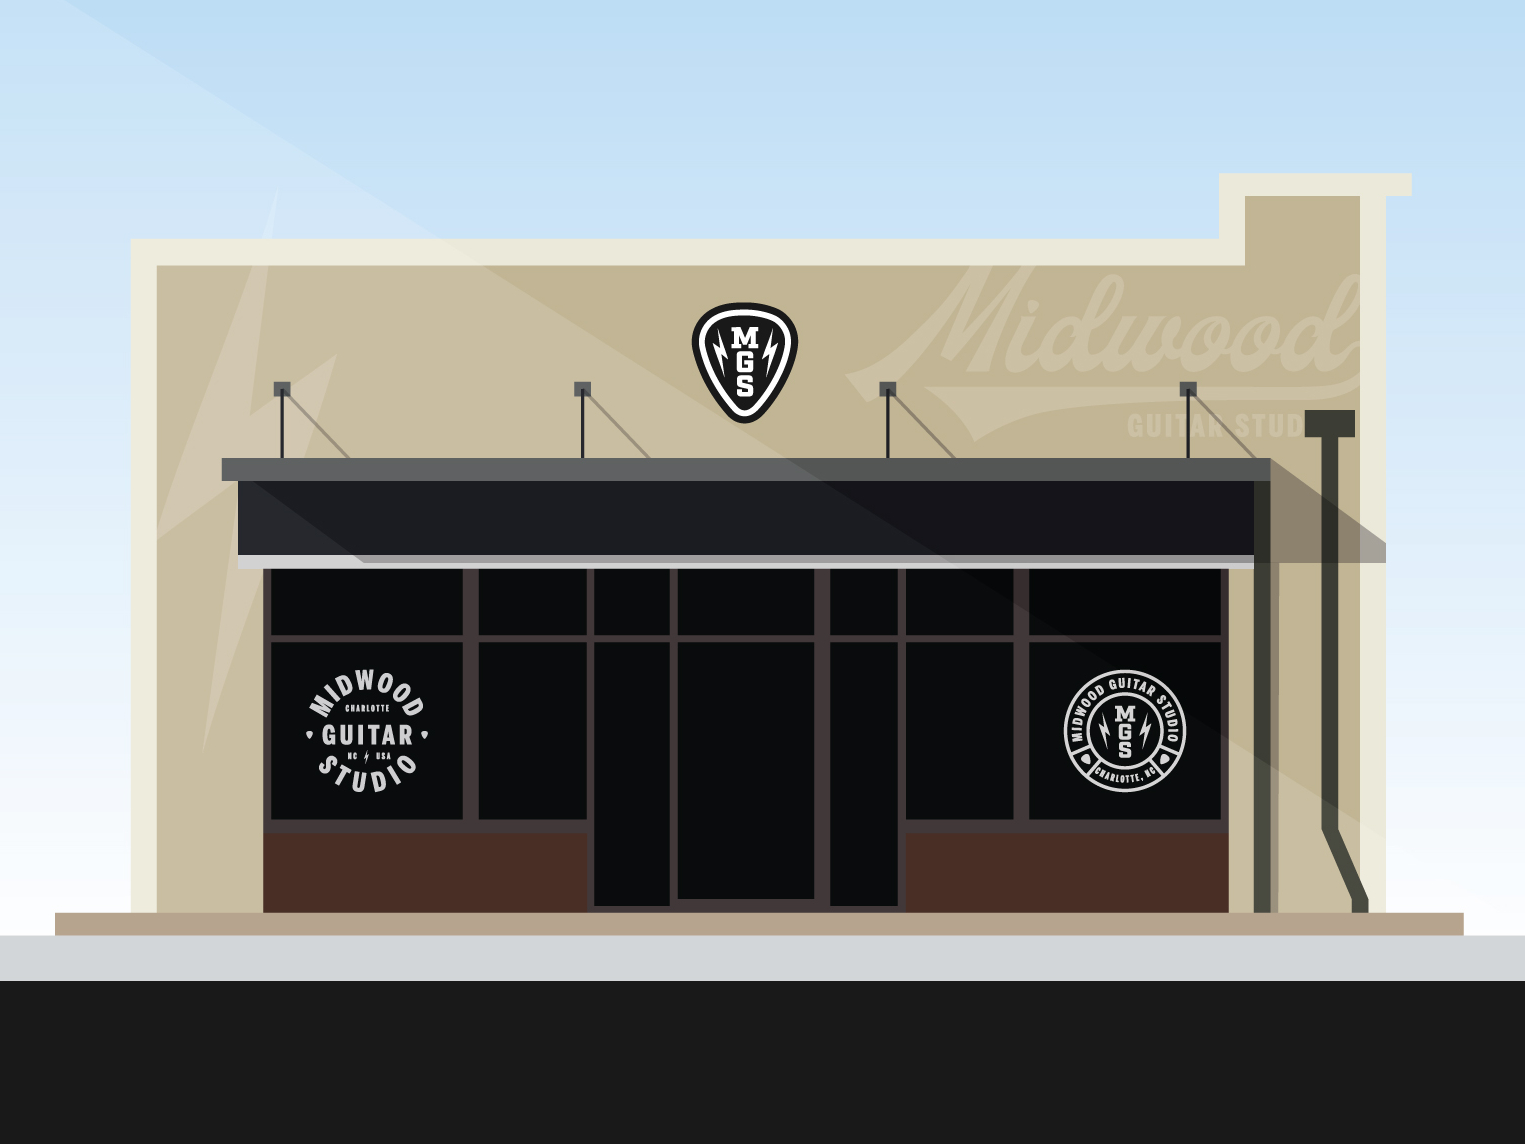 Midwood Guitar Studio Storefront by Eric Parks on Dribbble